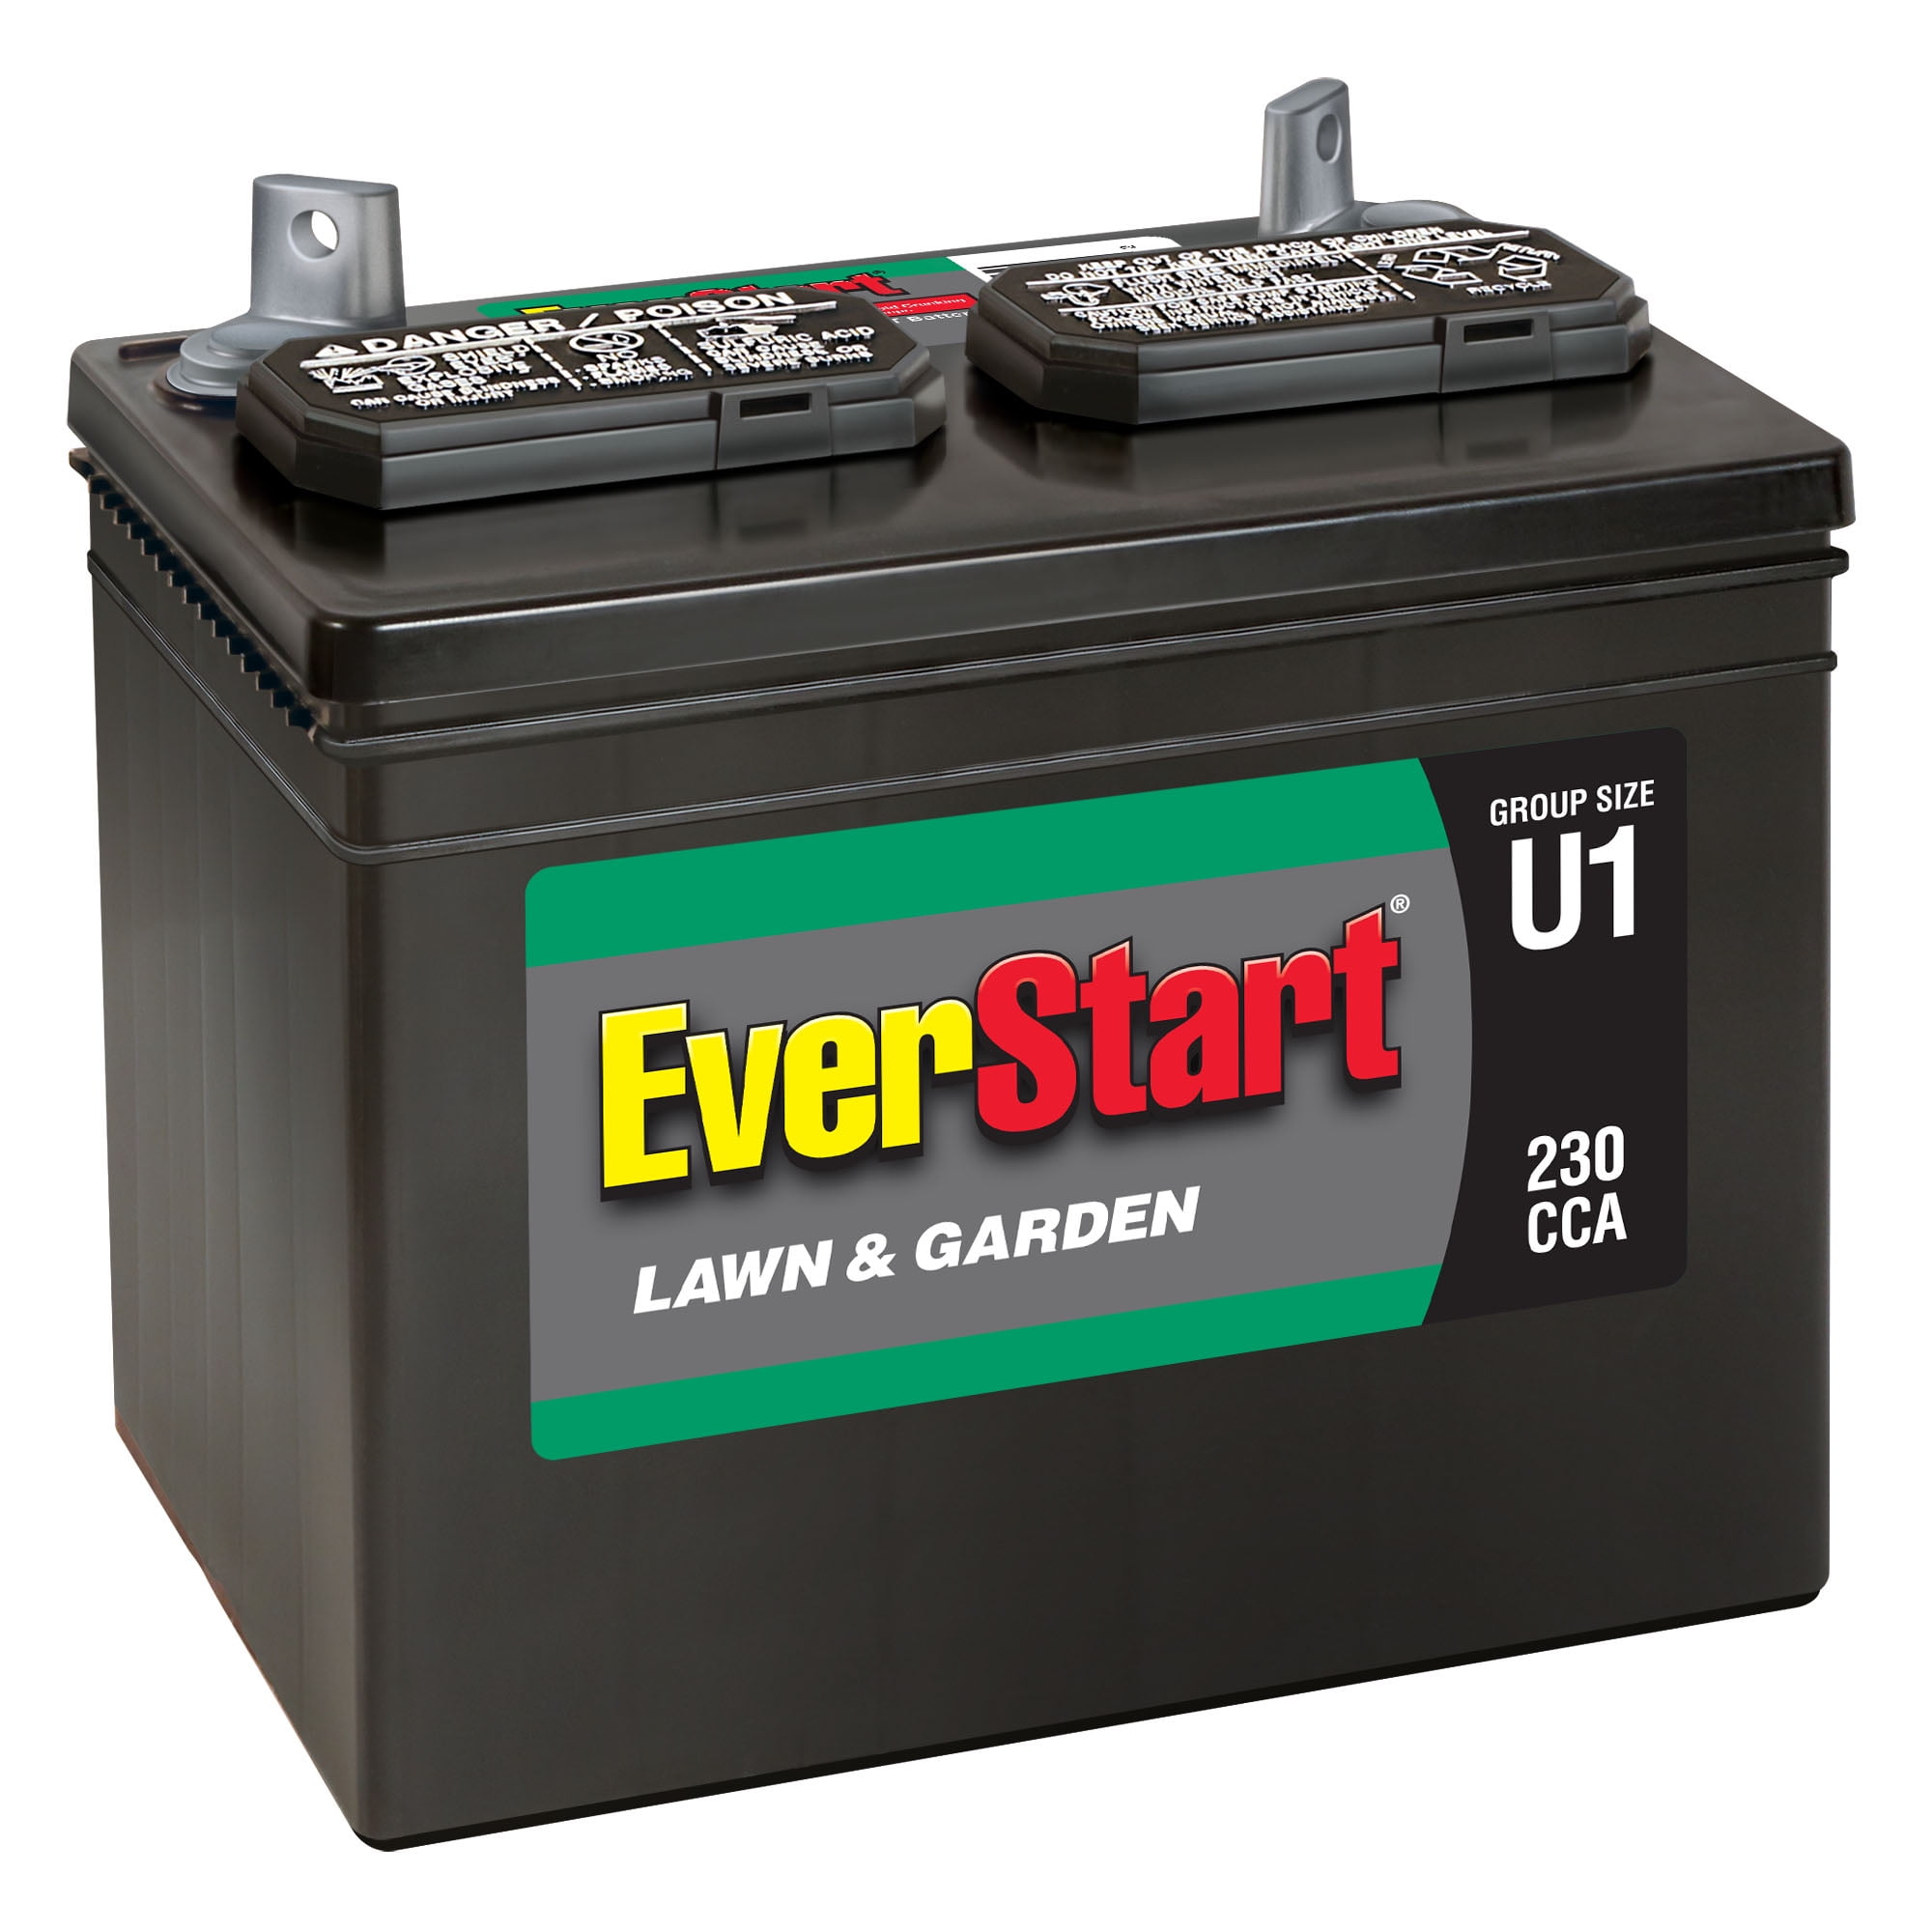 SLA Starting Battery for Lawn Tractors and Mowers ML-U1-CCAHR Mighty Max Battery Brand Product 12V 320 CCA U1